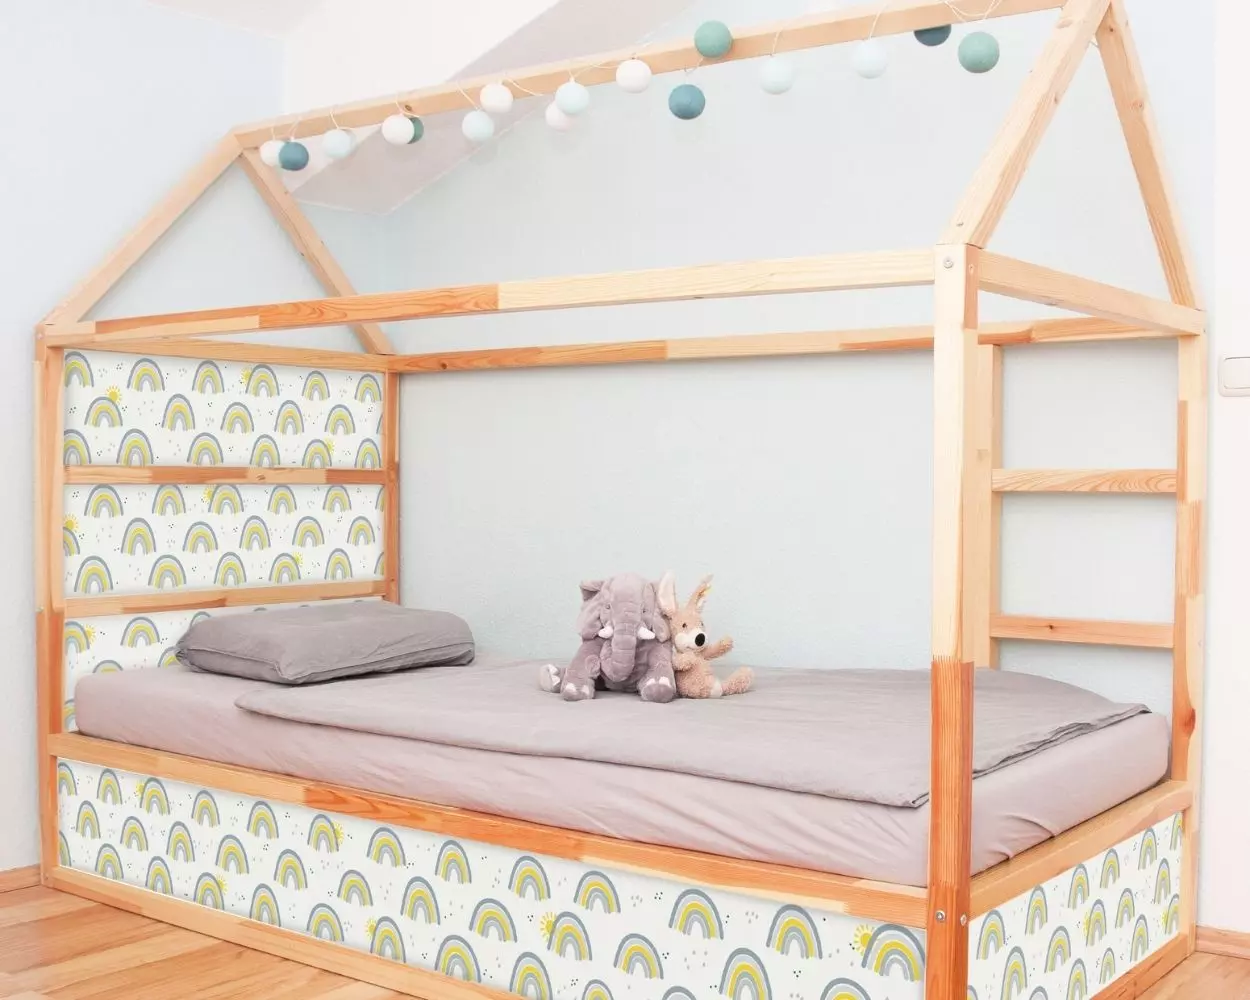 IKEA house bed: The best ideas for sleeping under the roof